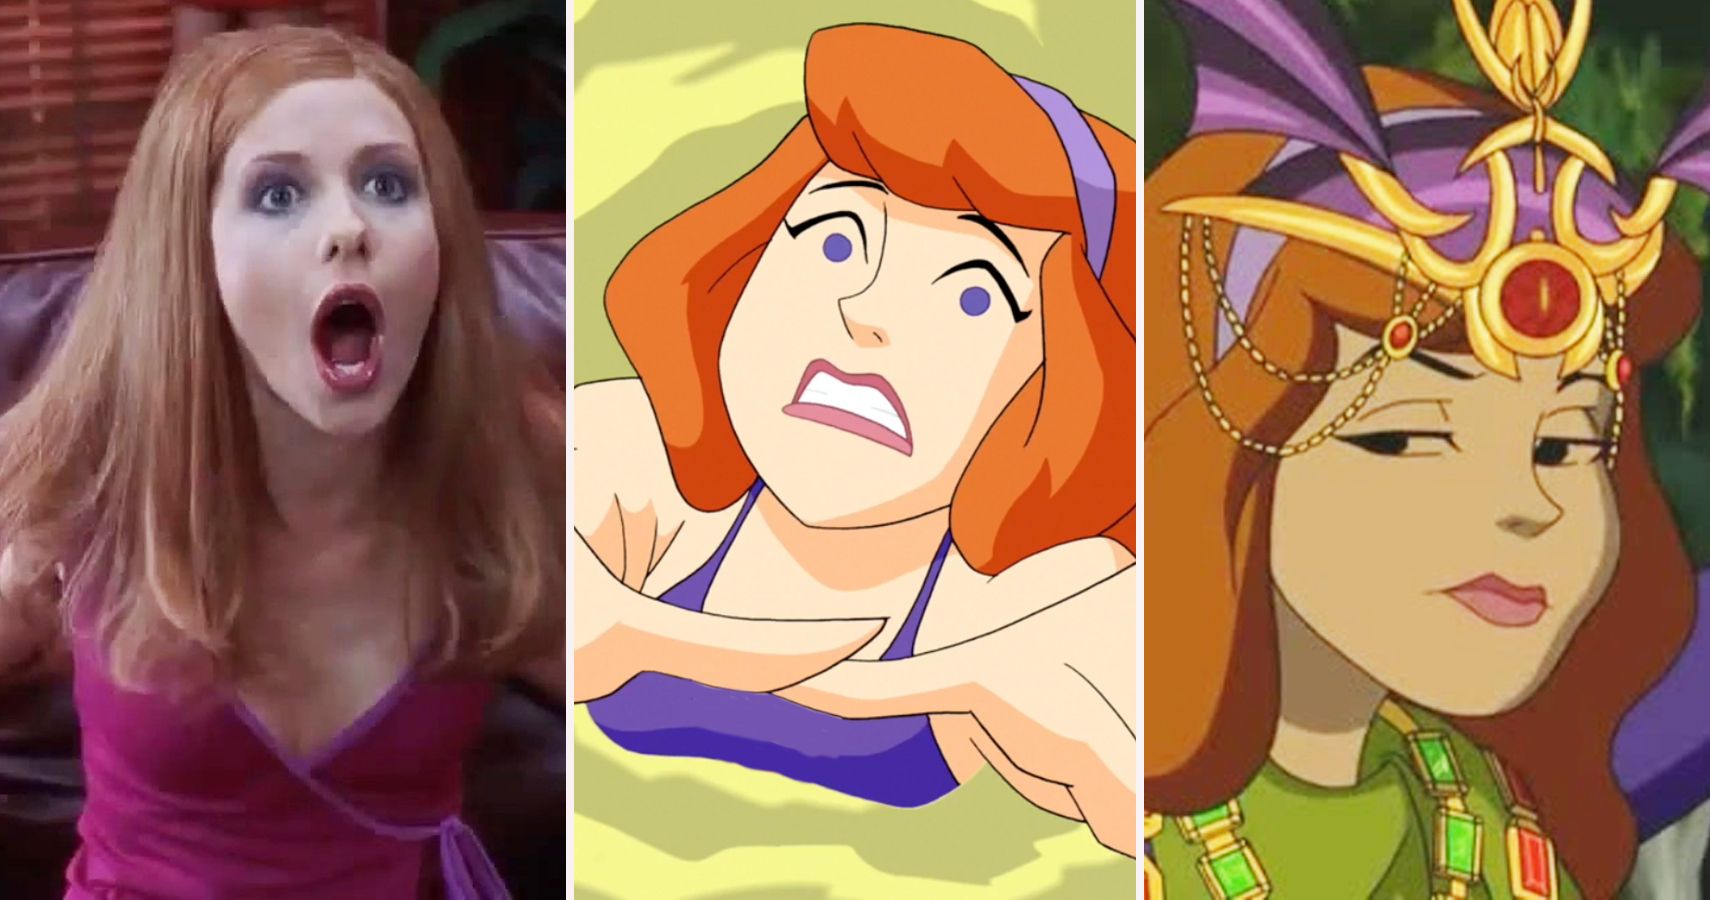 Daphne from scooby doo loses underwear